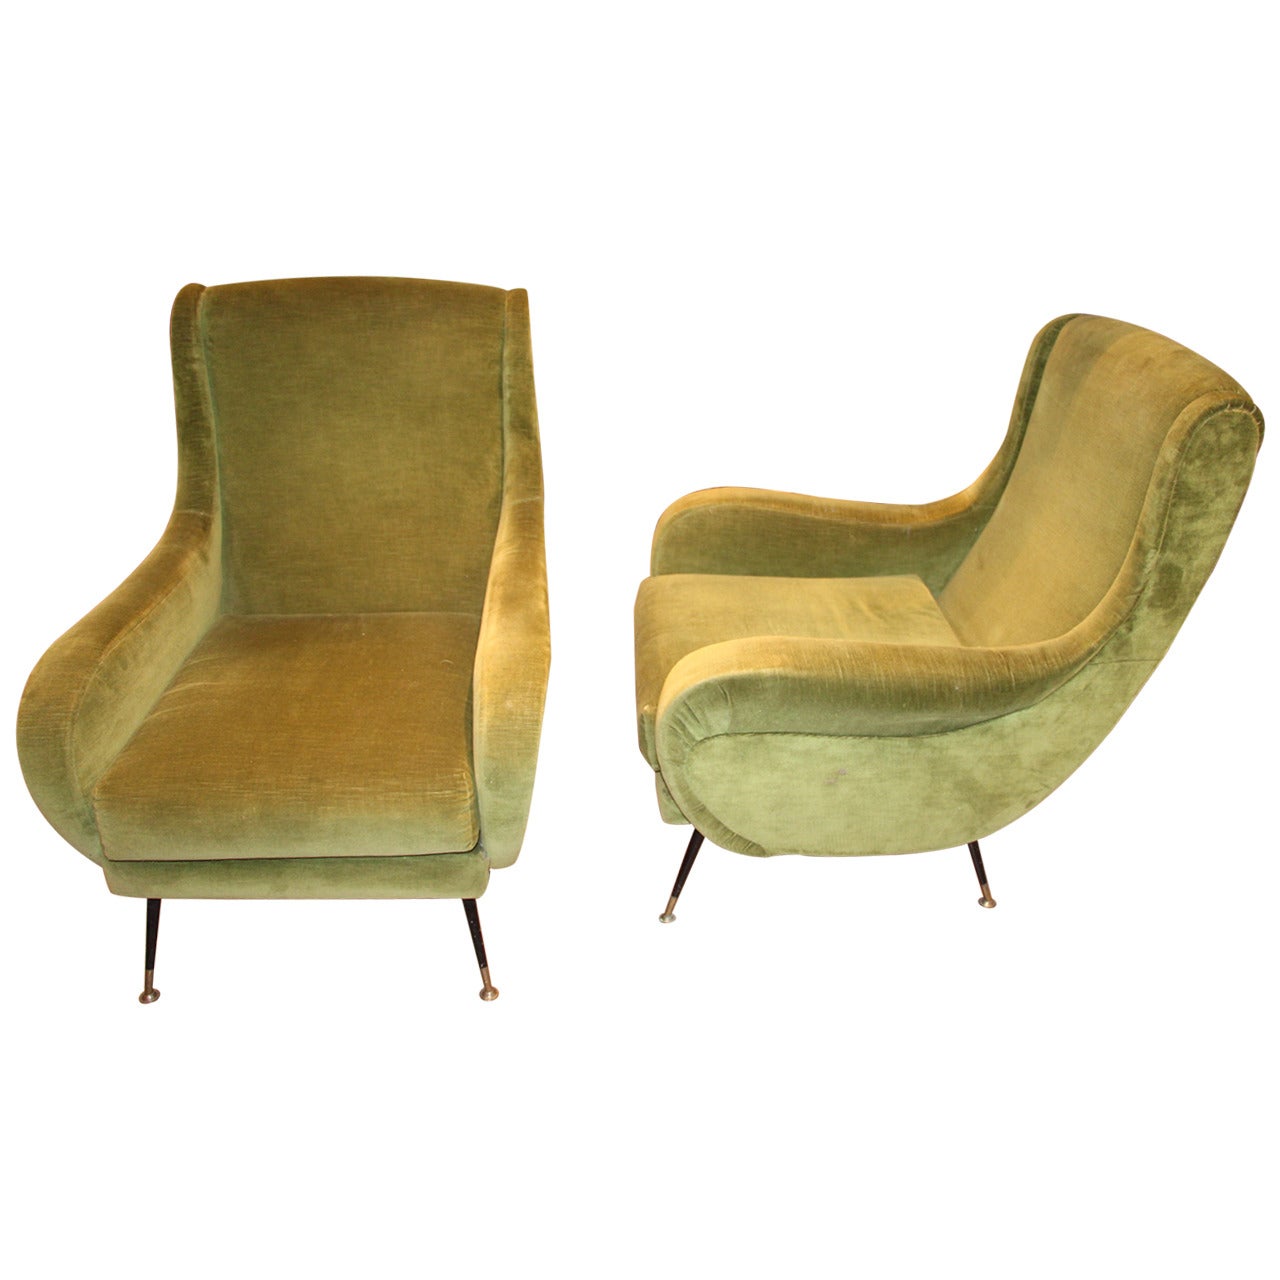 Pair of Italian Mid-Century Modern Armchairs in the Style of Marco Zanusso